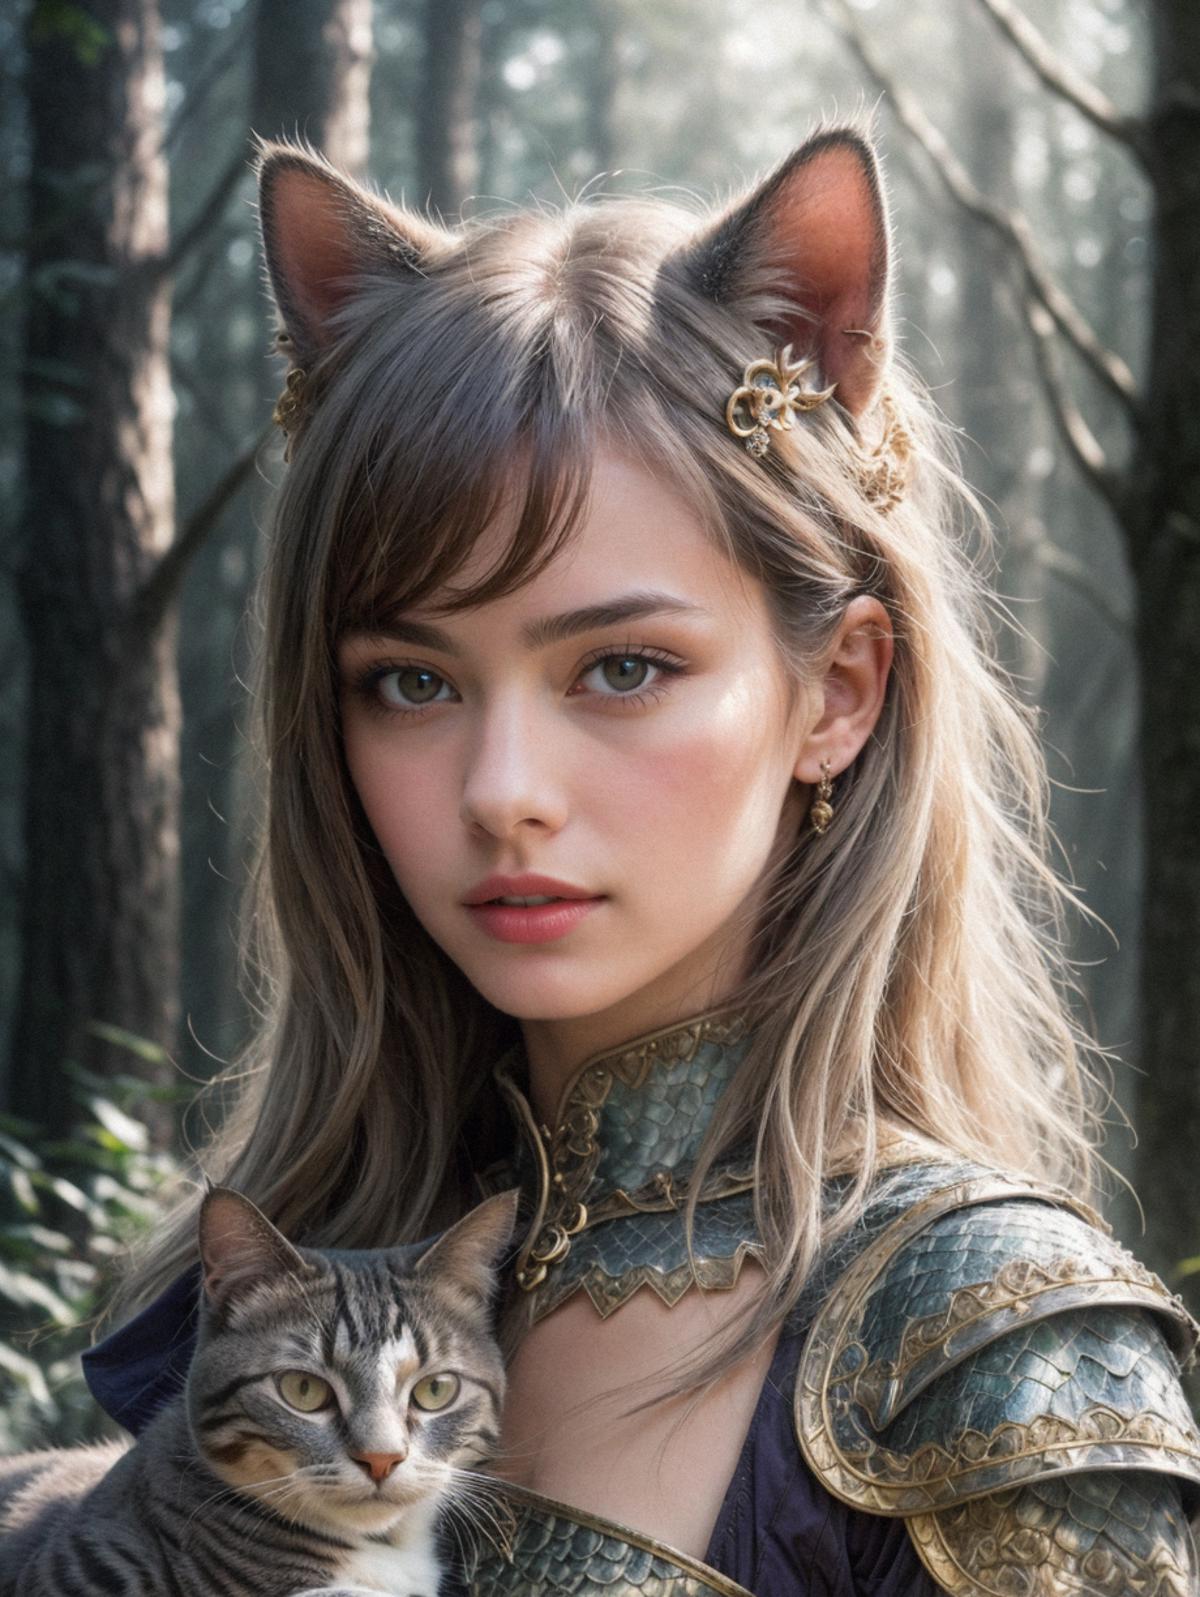 A woman in a fantasy costume holding a cat in a forest.